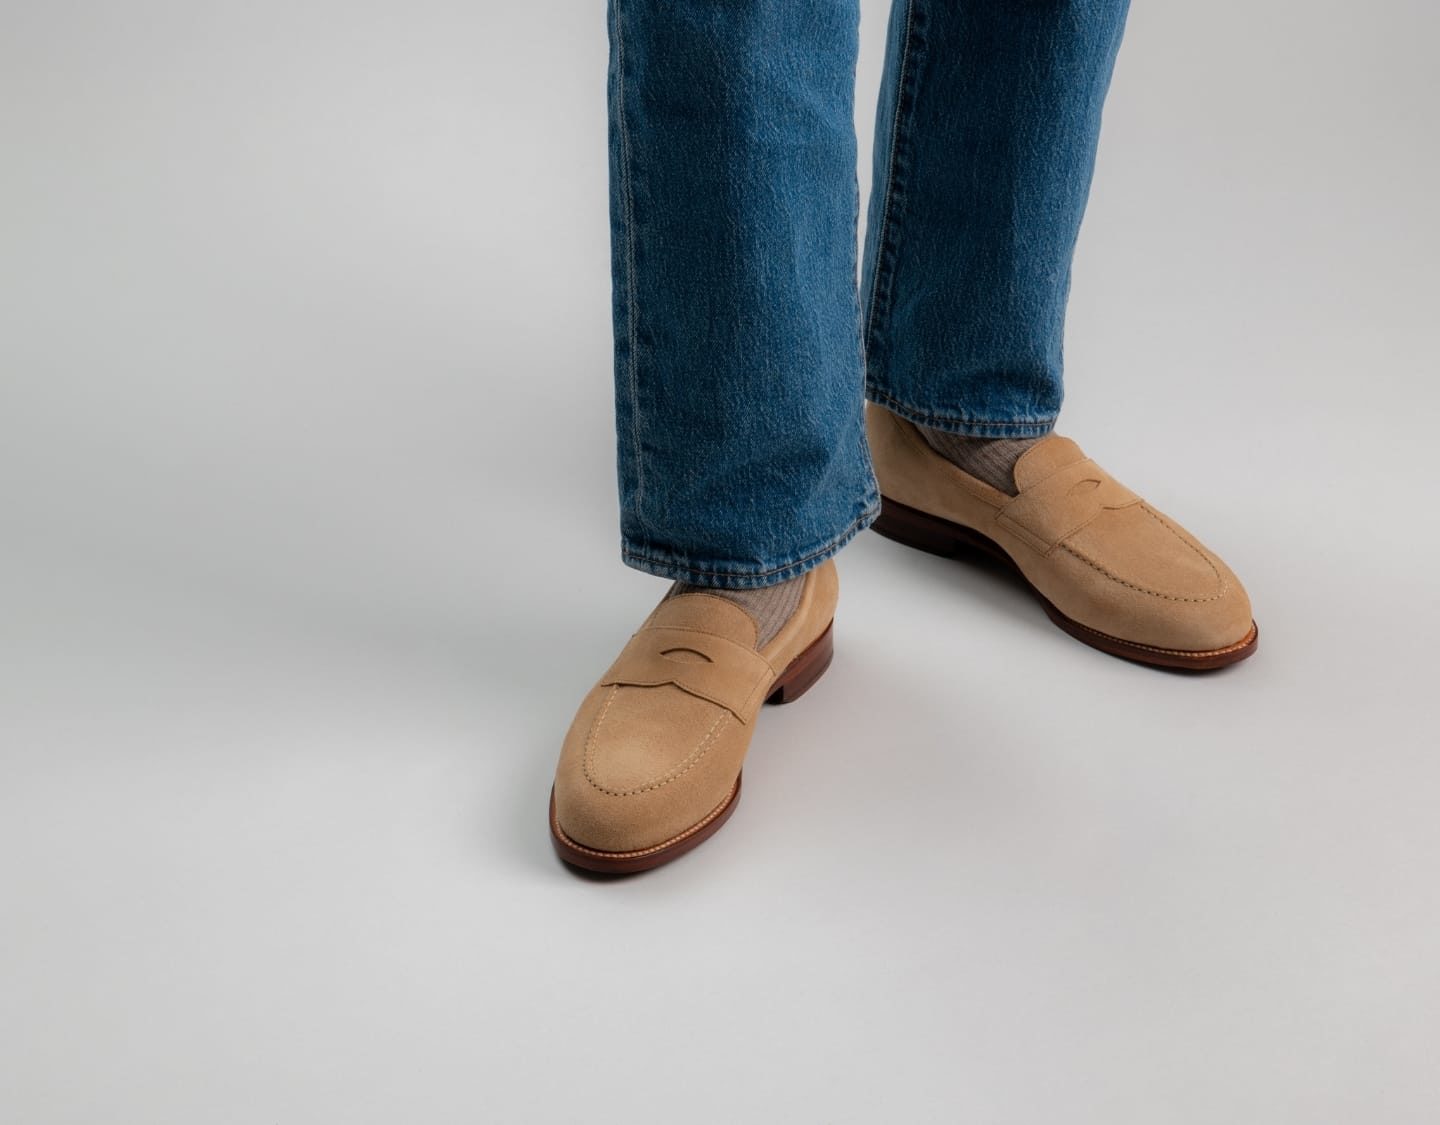 How to wear loafers with jeans - Fabric 